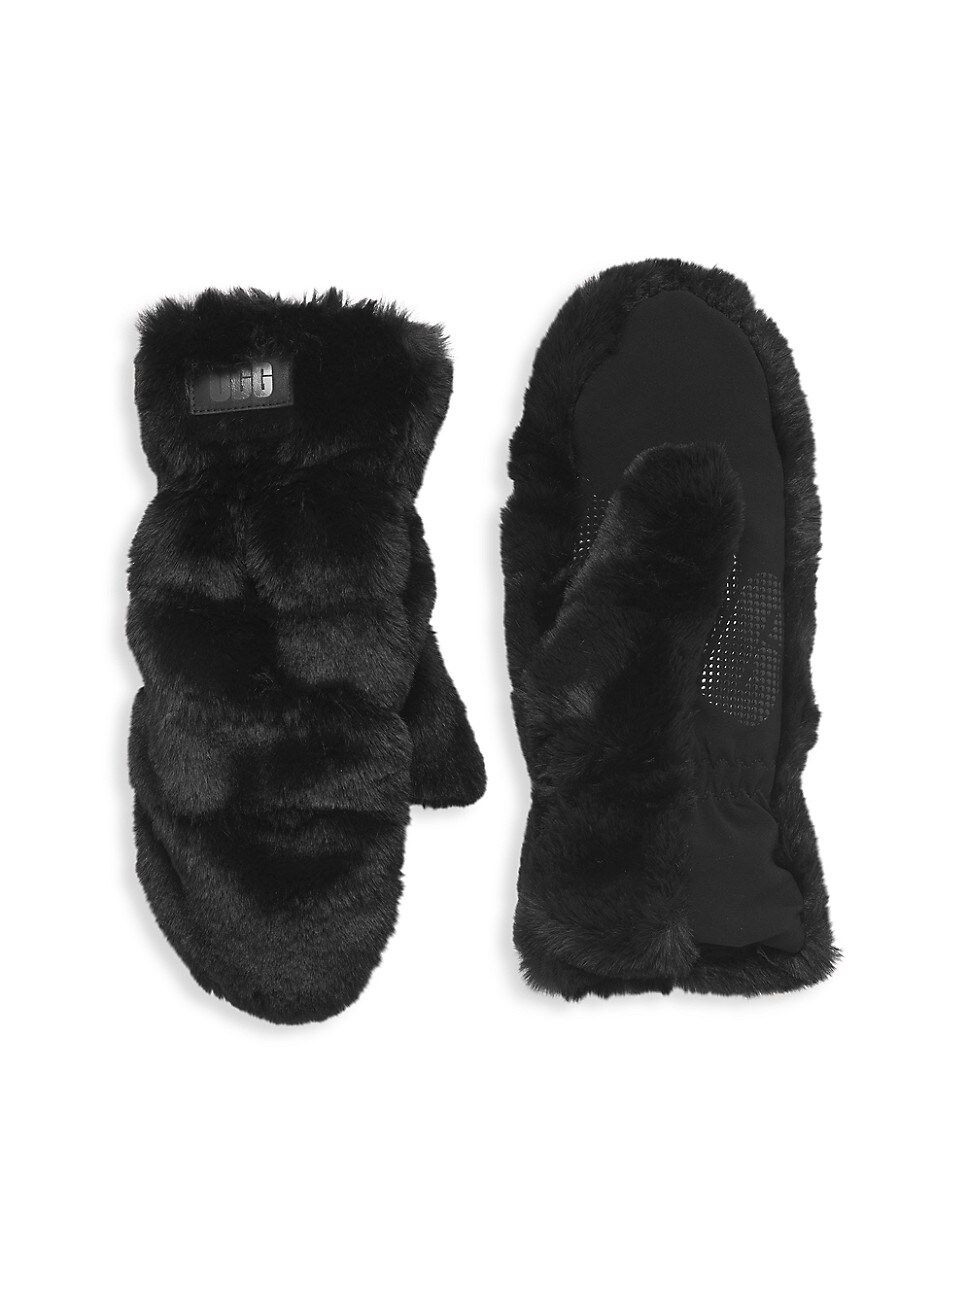 Women's Quilted Faux Fur Mittens - Black - Size Large | Saks Fifth Avenue